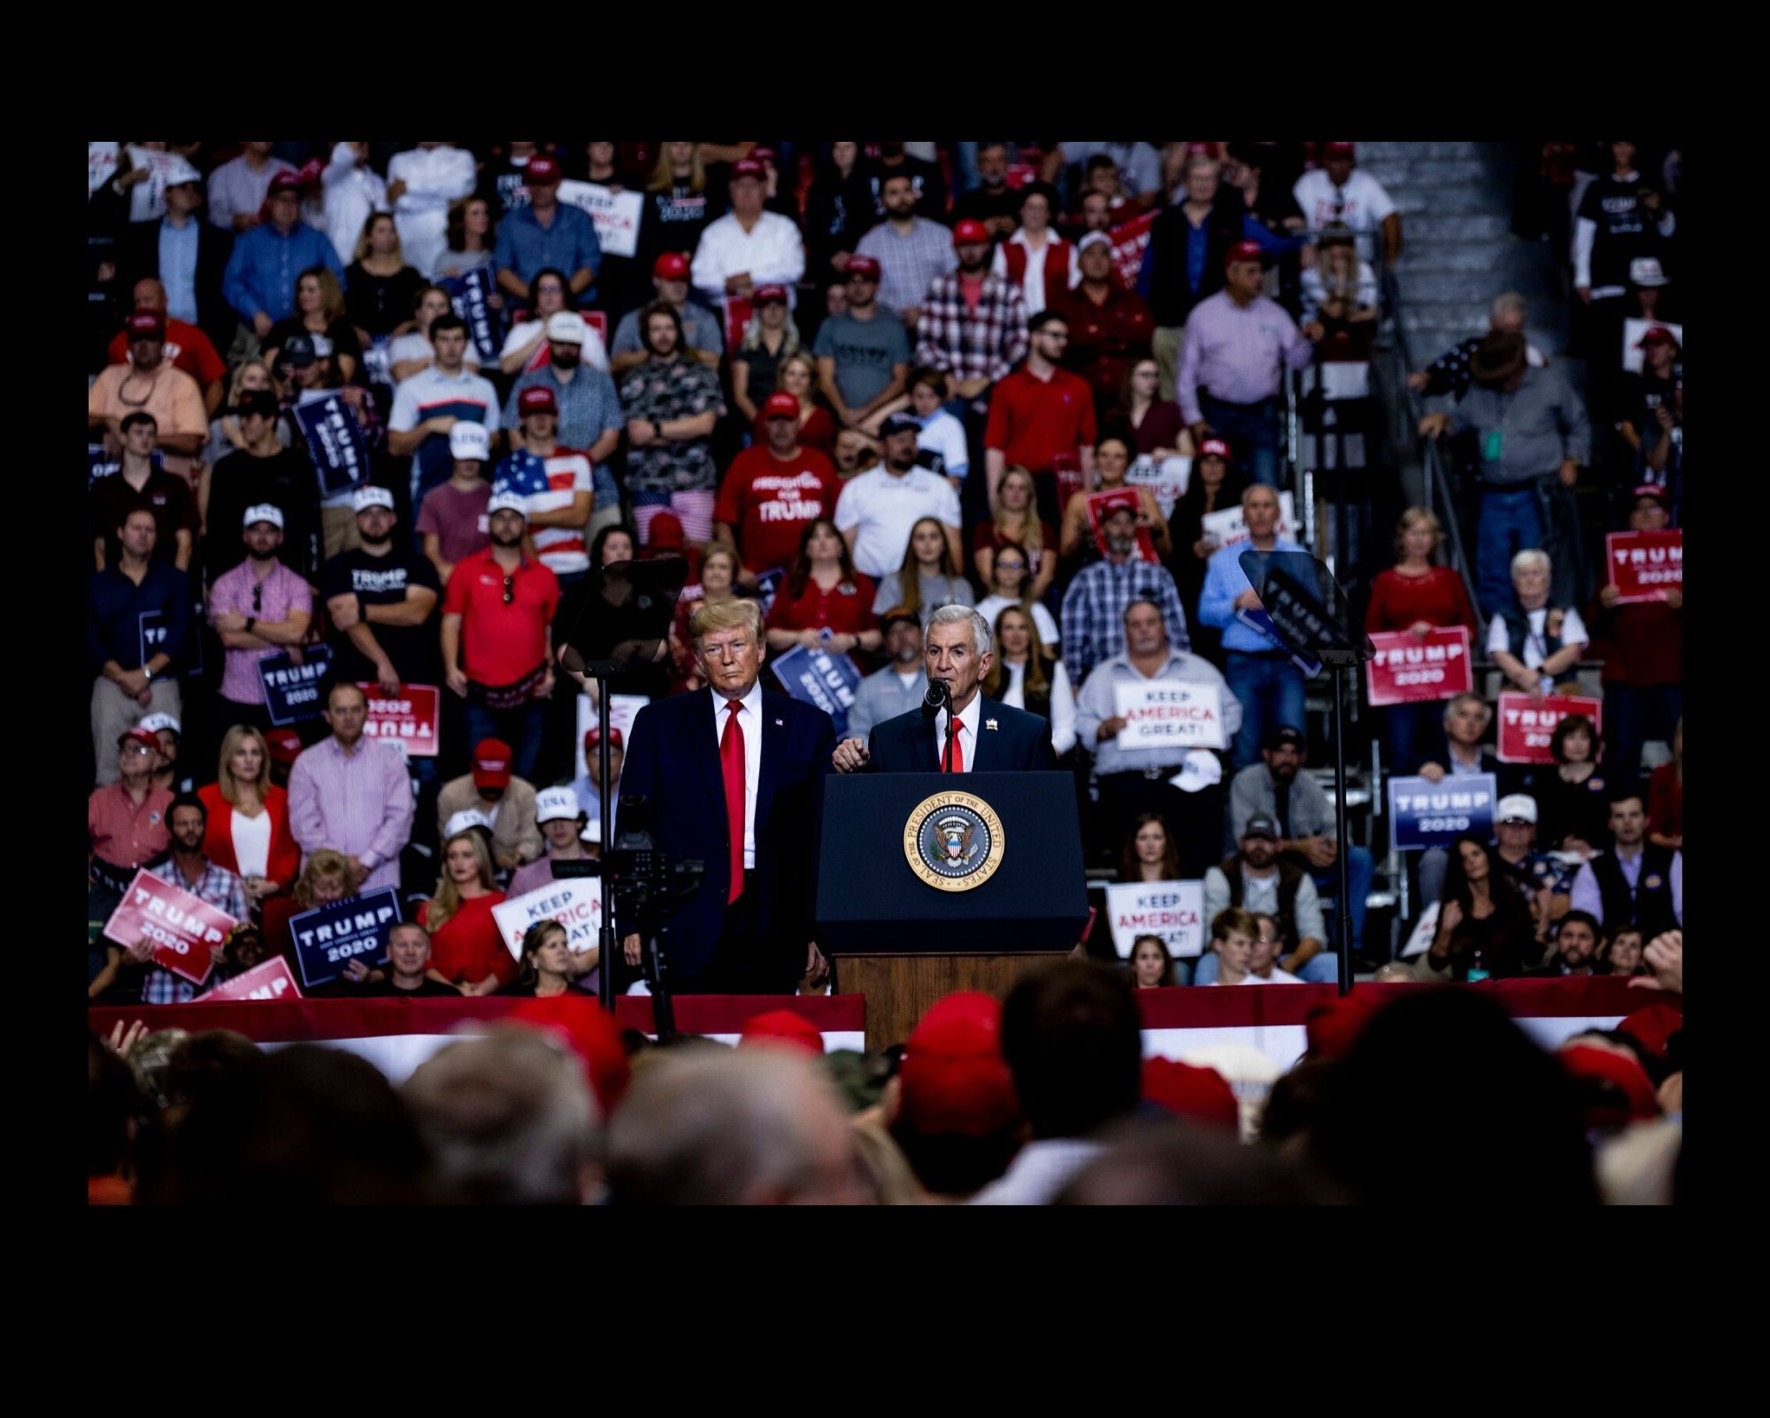 President Trump and Vice President Pence standing on a stage at a Trump rally with supporters sitting behind them on bleachers and also in the foreground.